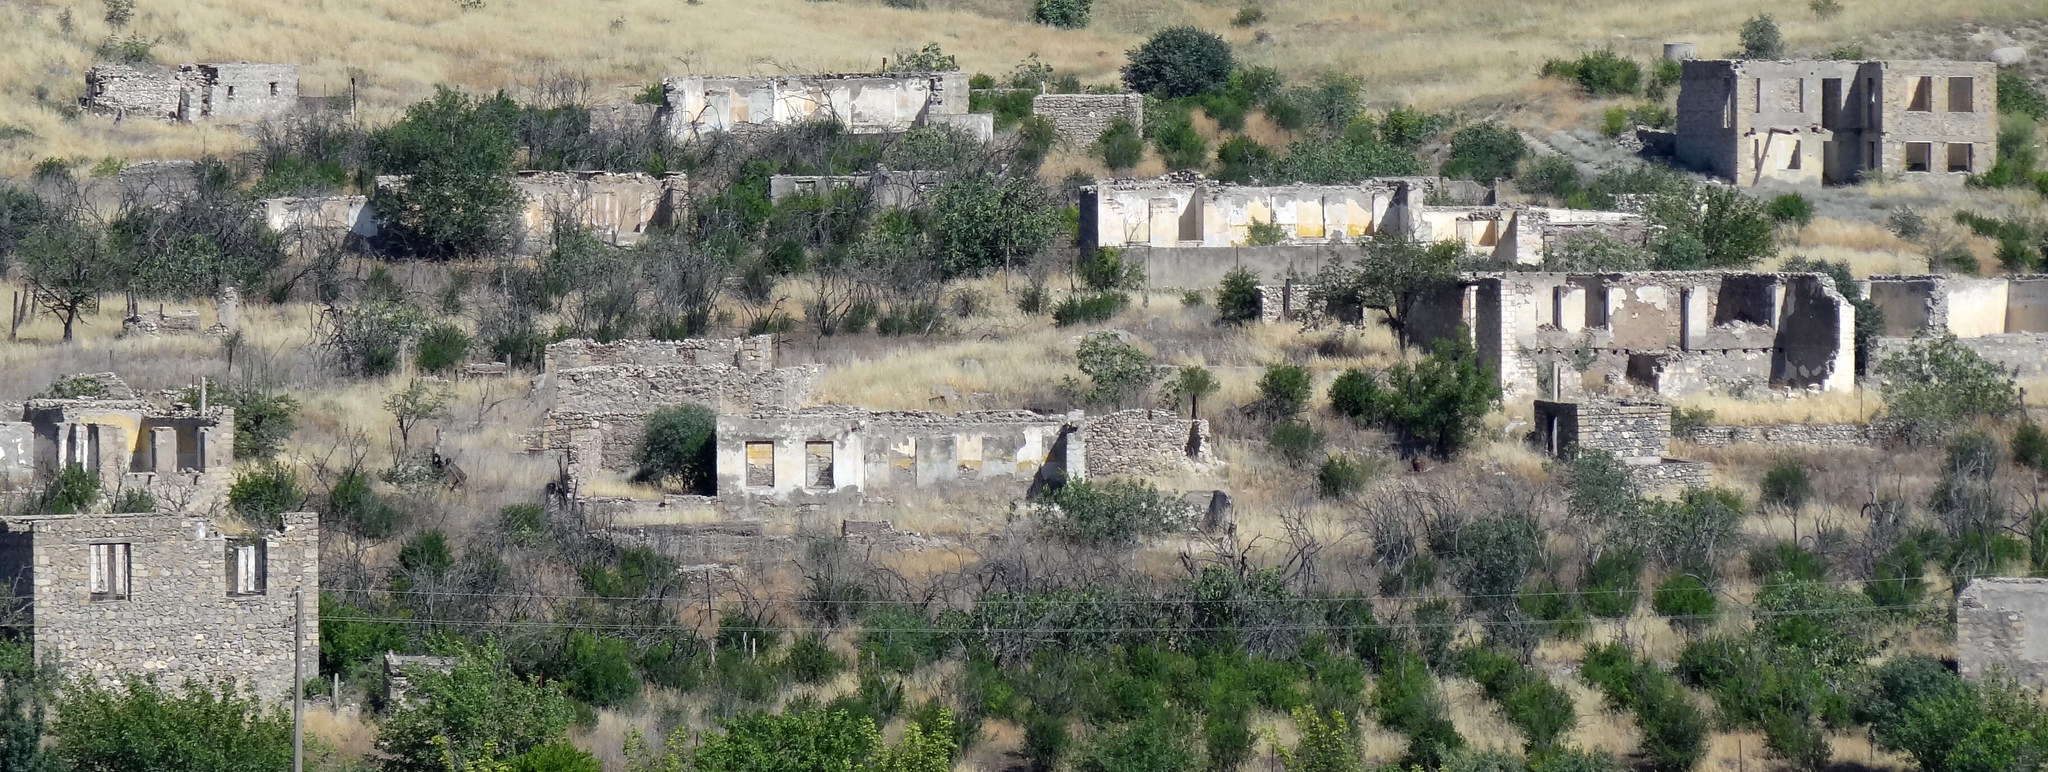 Photograph of ruins in the Nagorno-Karabakh region as a result of the Armenian–Azerbaijani conflict